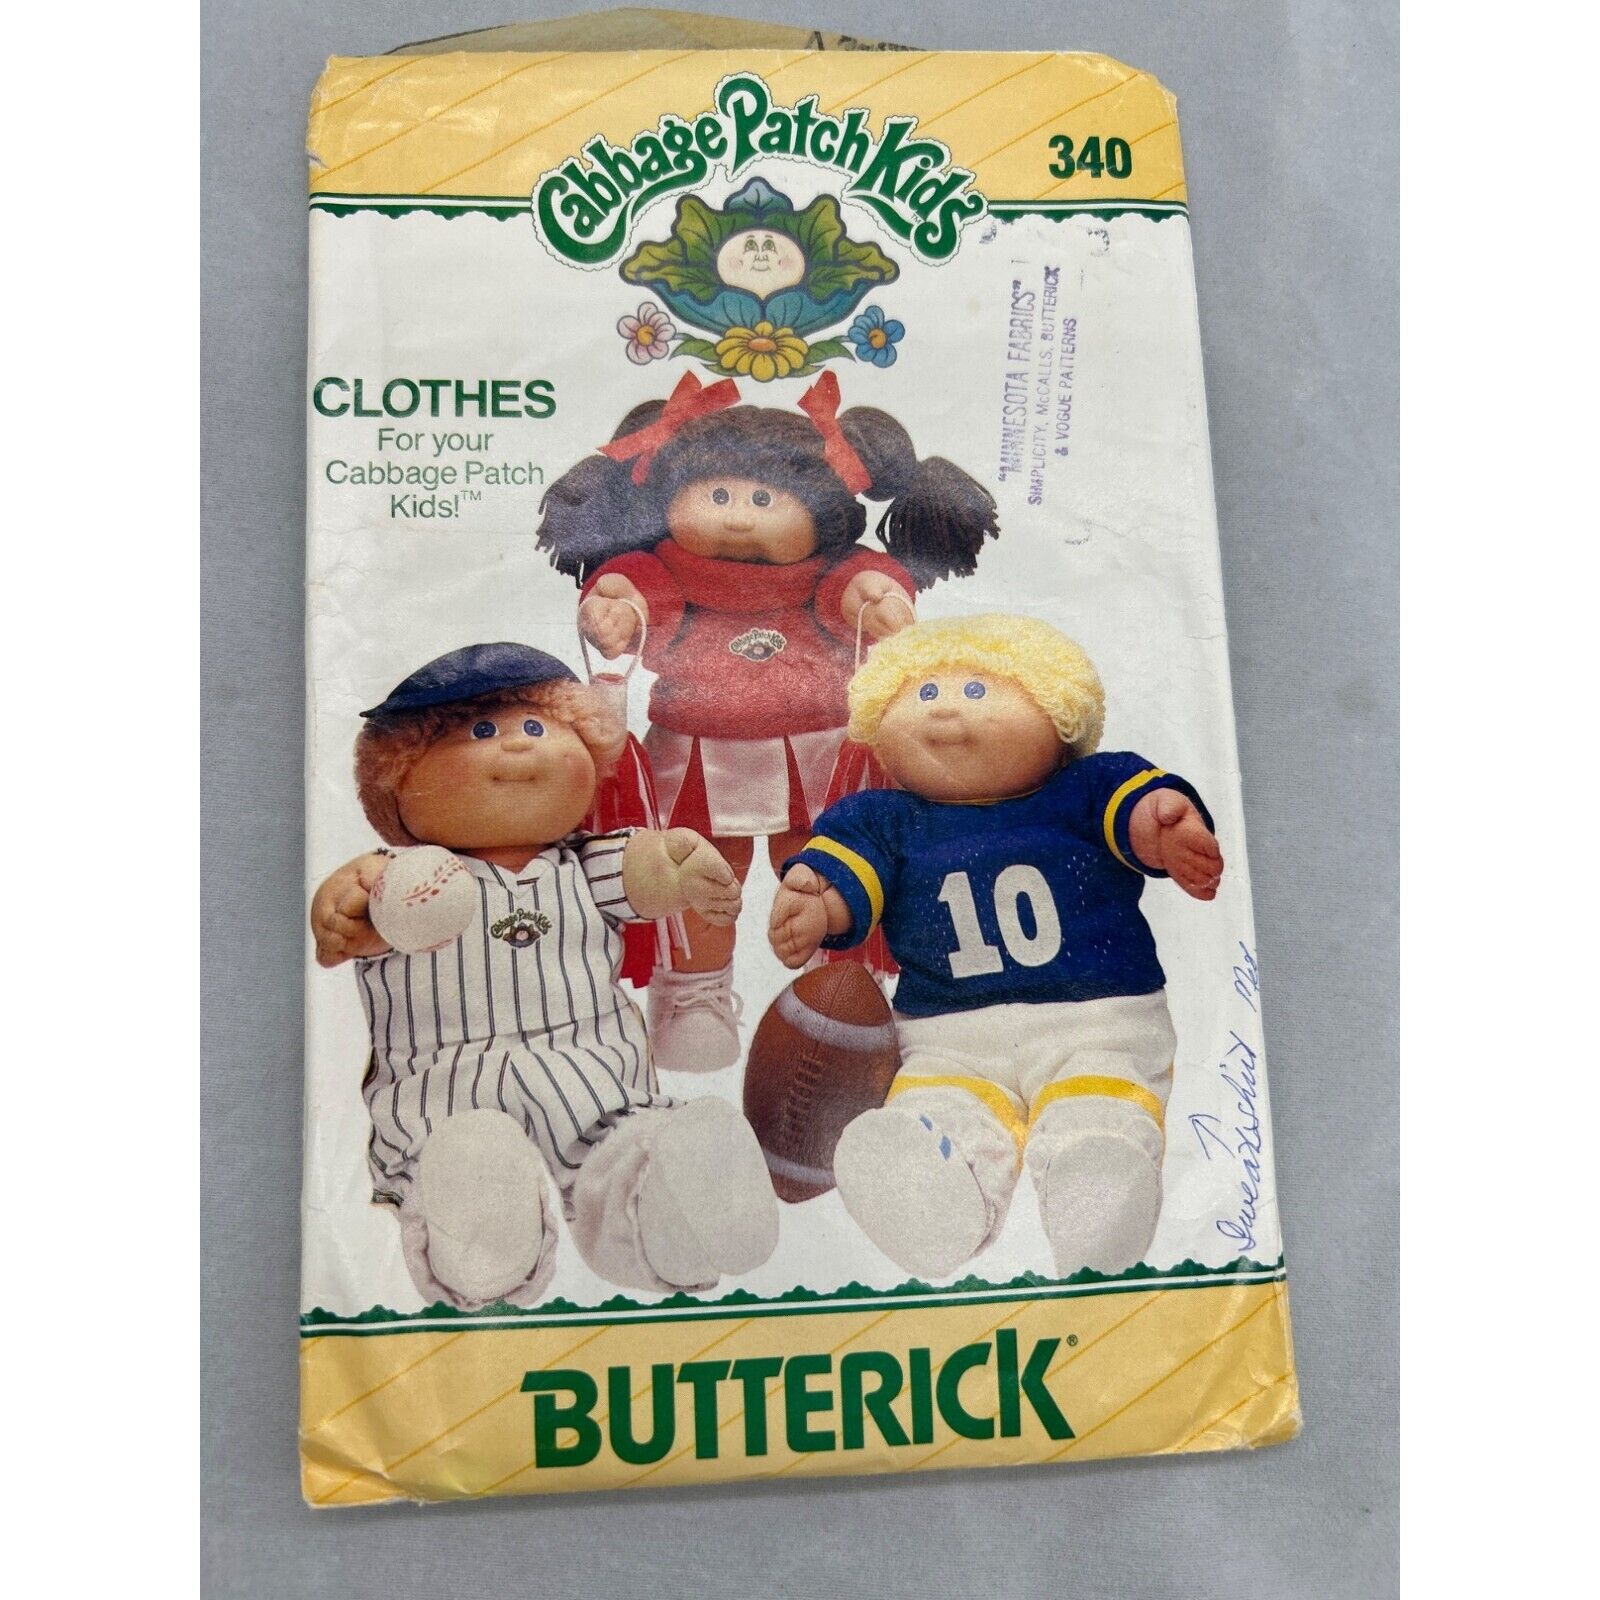 Vintage Cabbage Patch Kids Butterick Sewing Sports Patterns 340